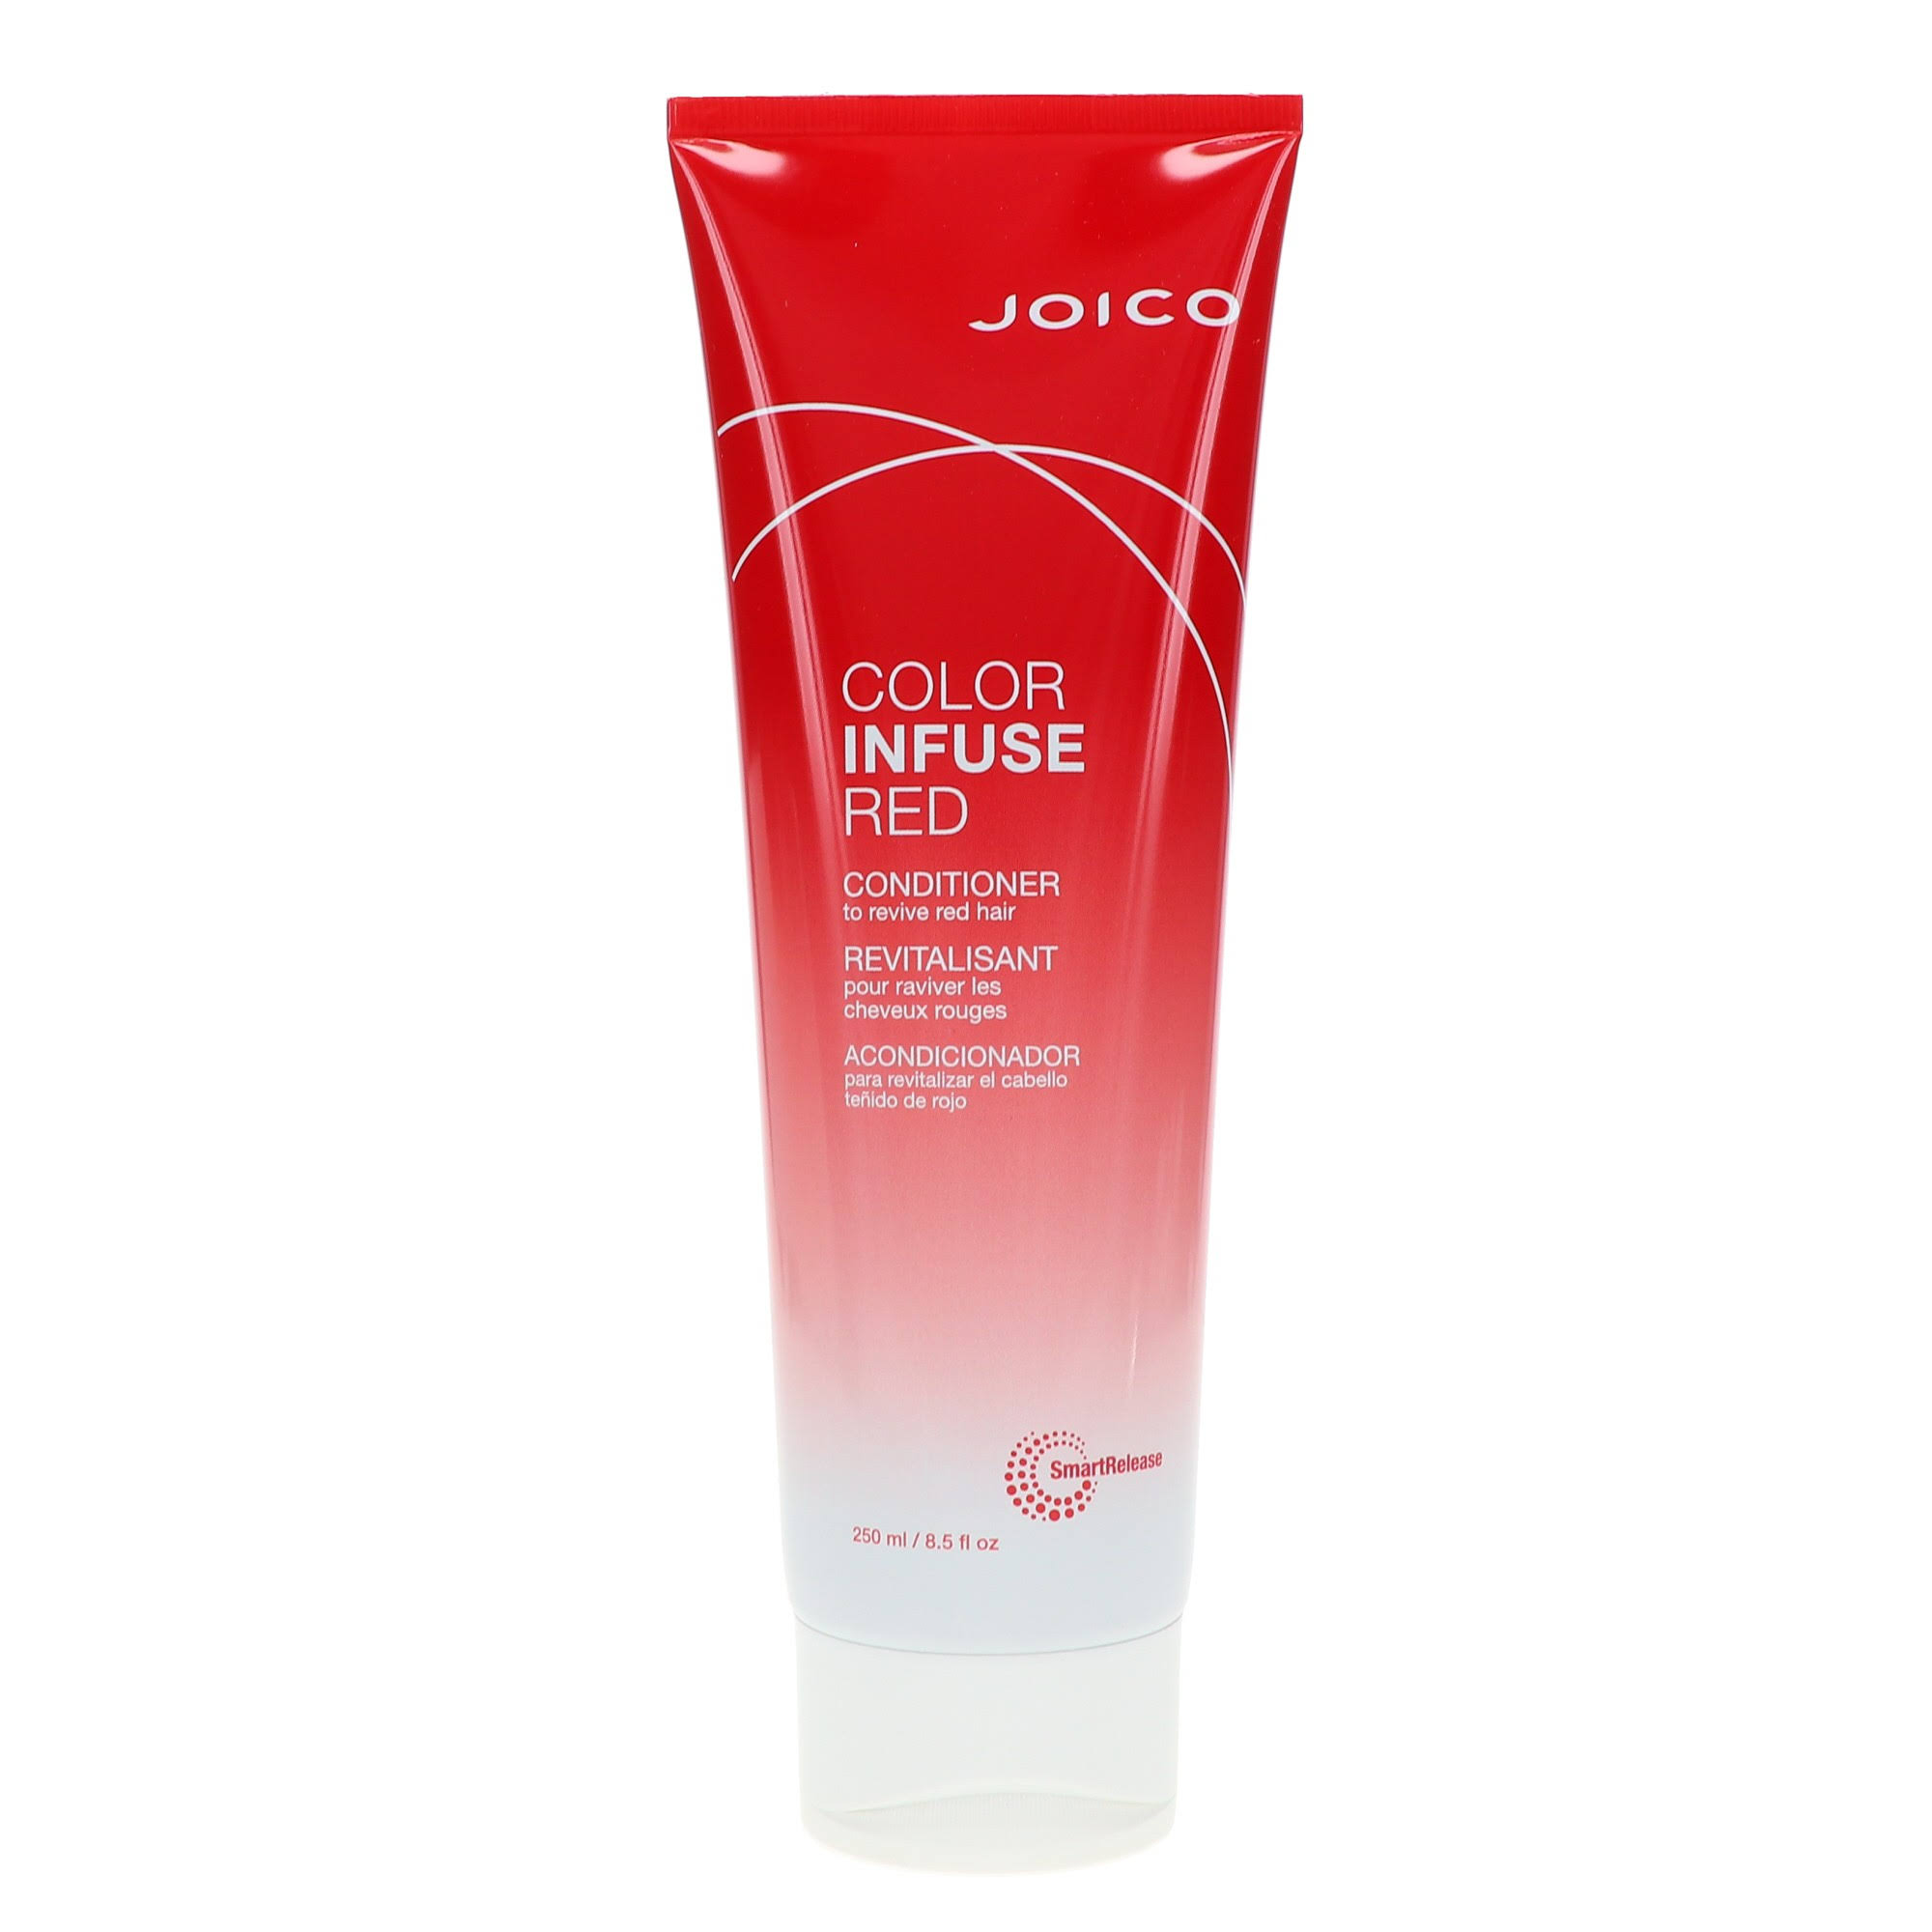 Joico Color Infuse Red Conditioner (To Revive Red Hair) 250ml